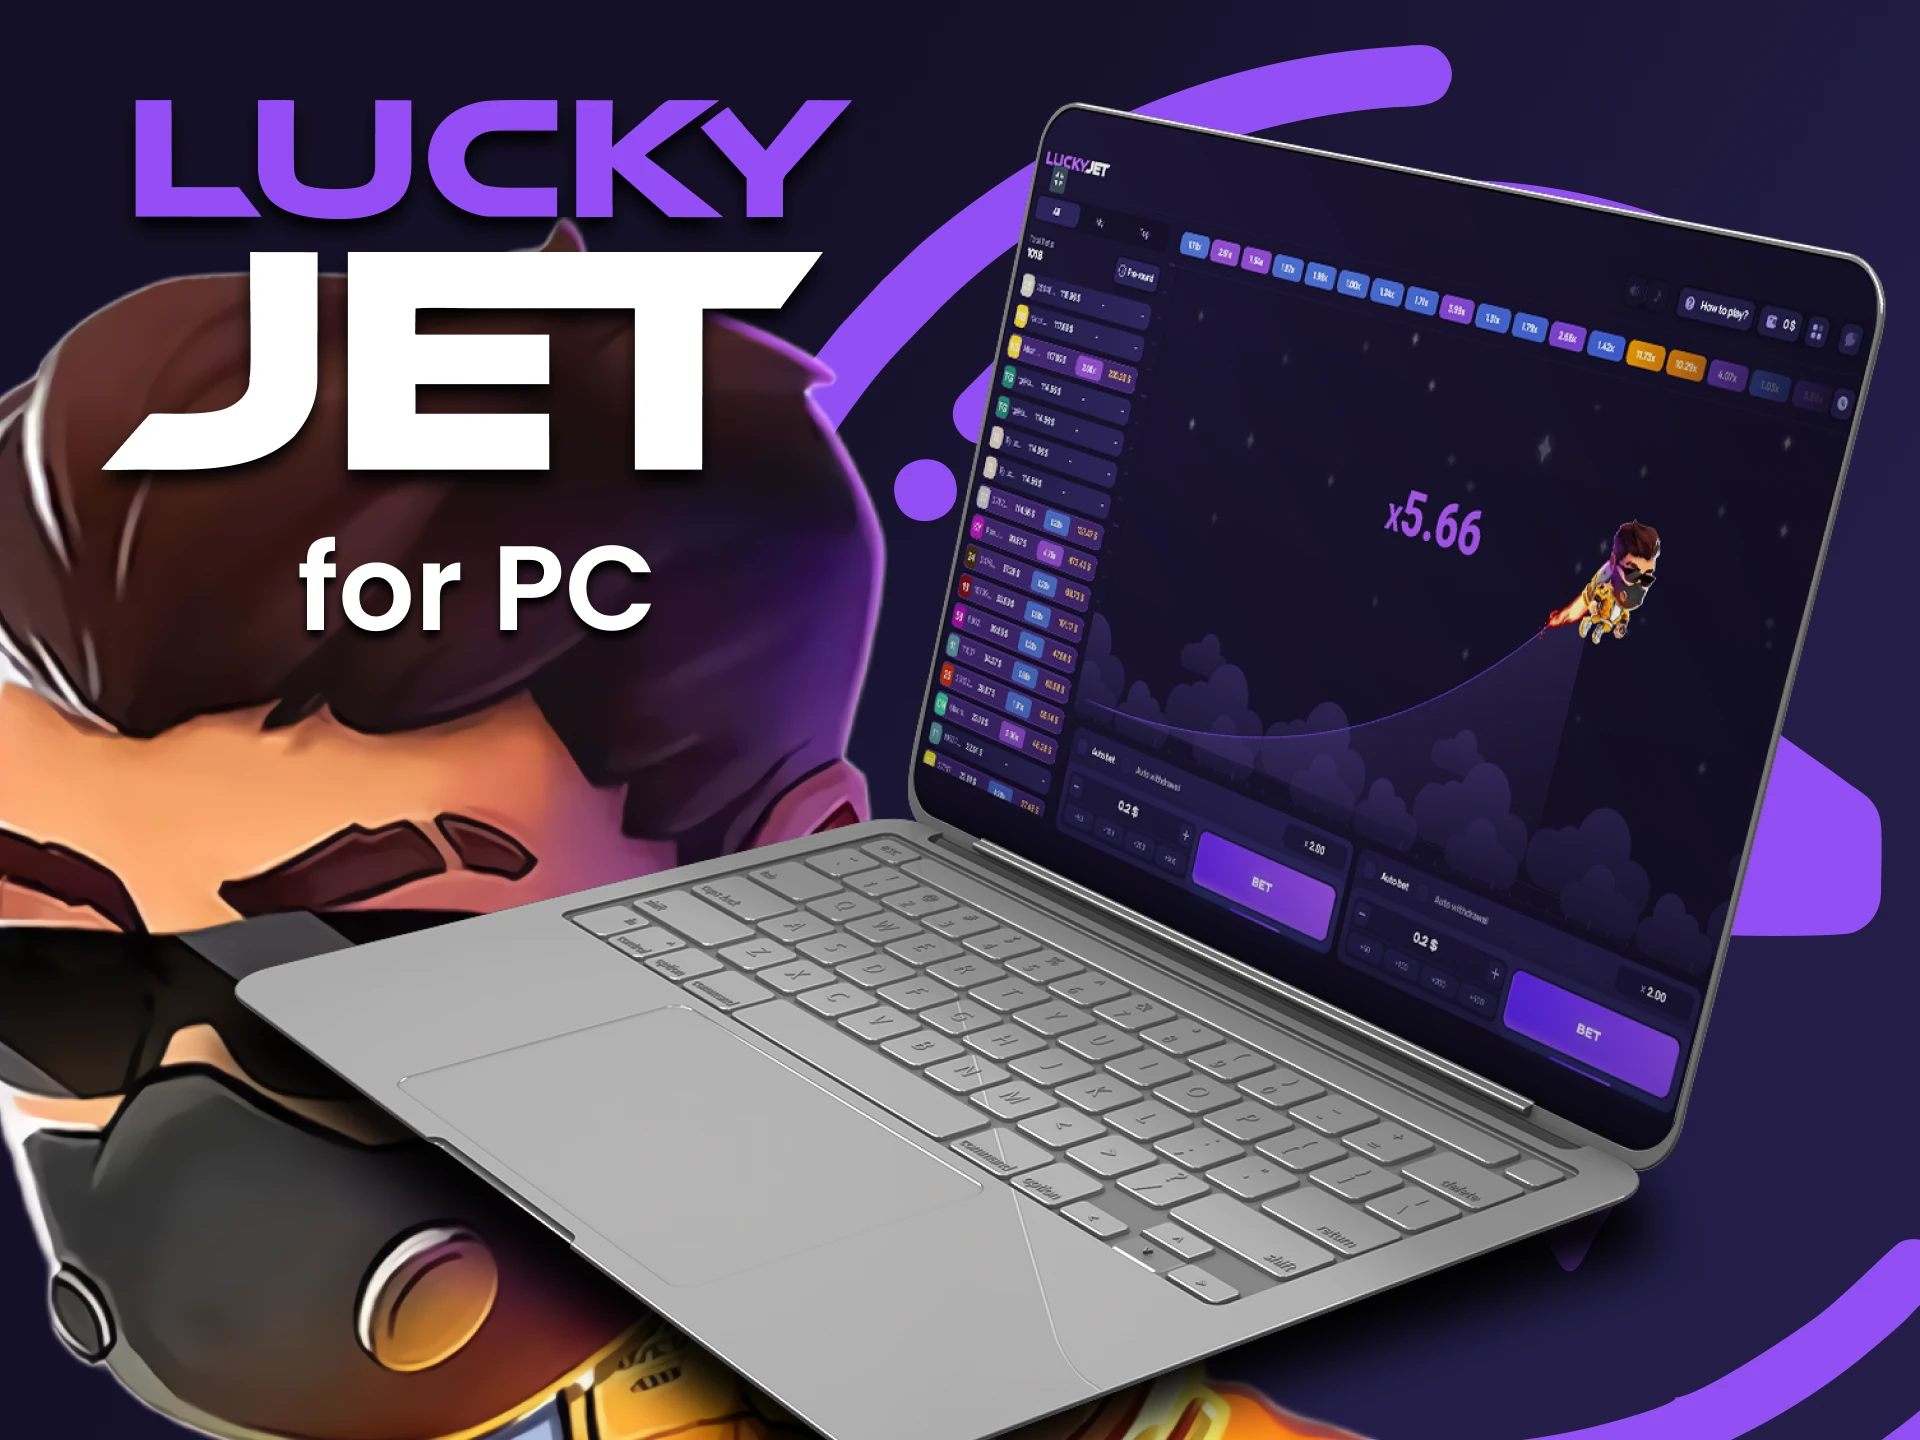 You can play Lucky Jet using your computer.